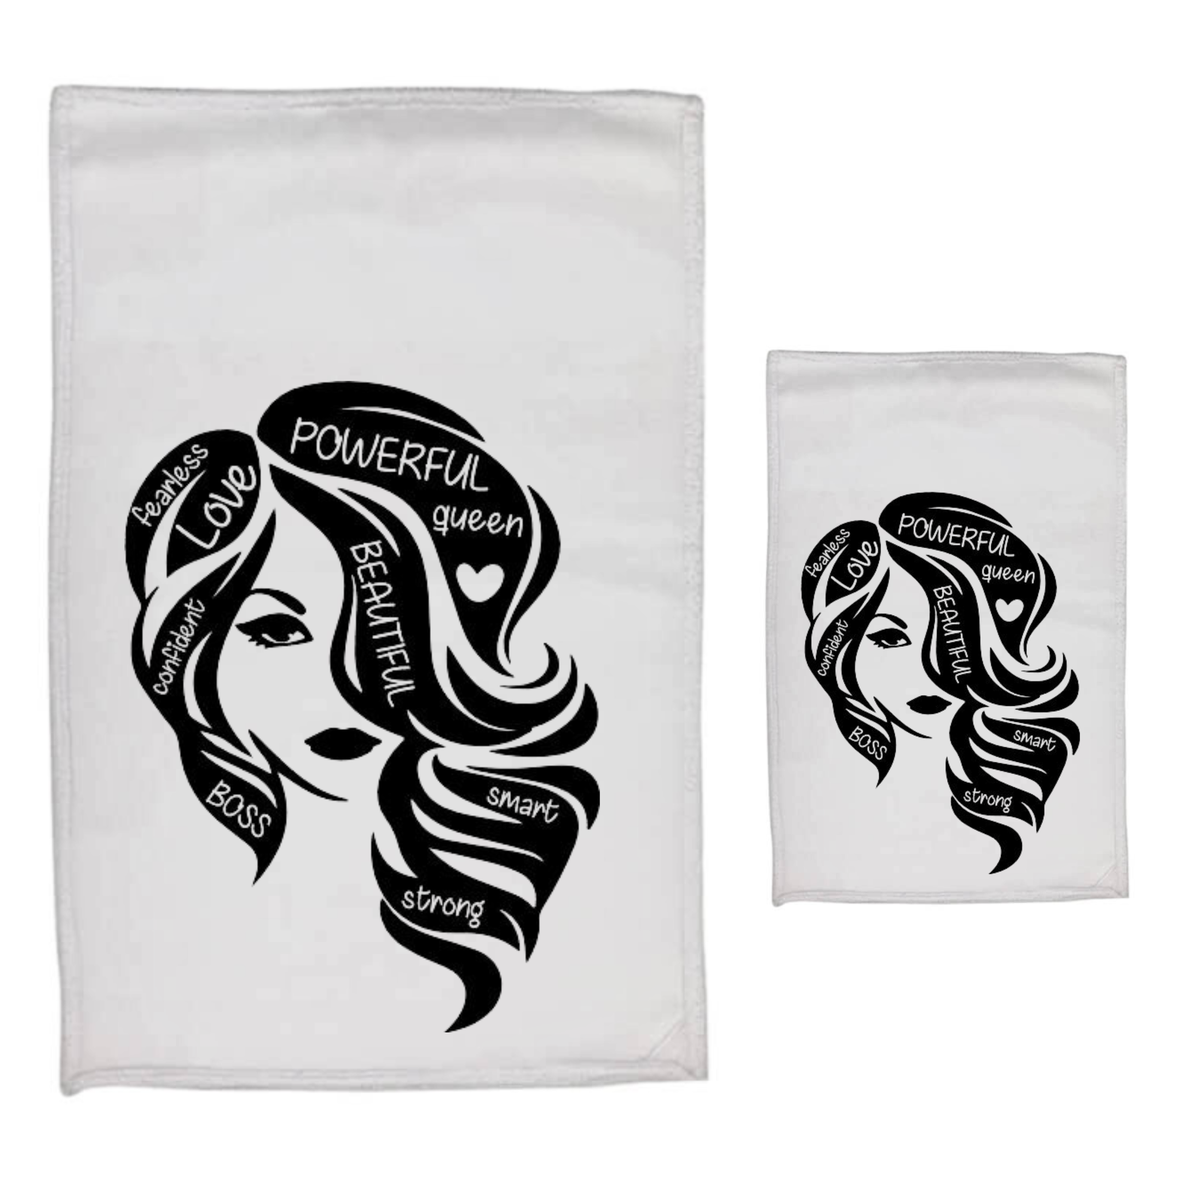 Powerful queen - White Polyester Hand & Face Towel